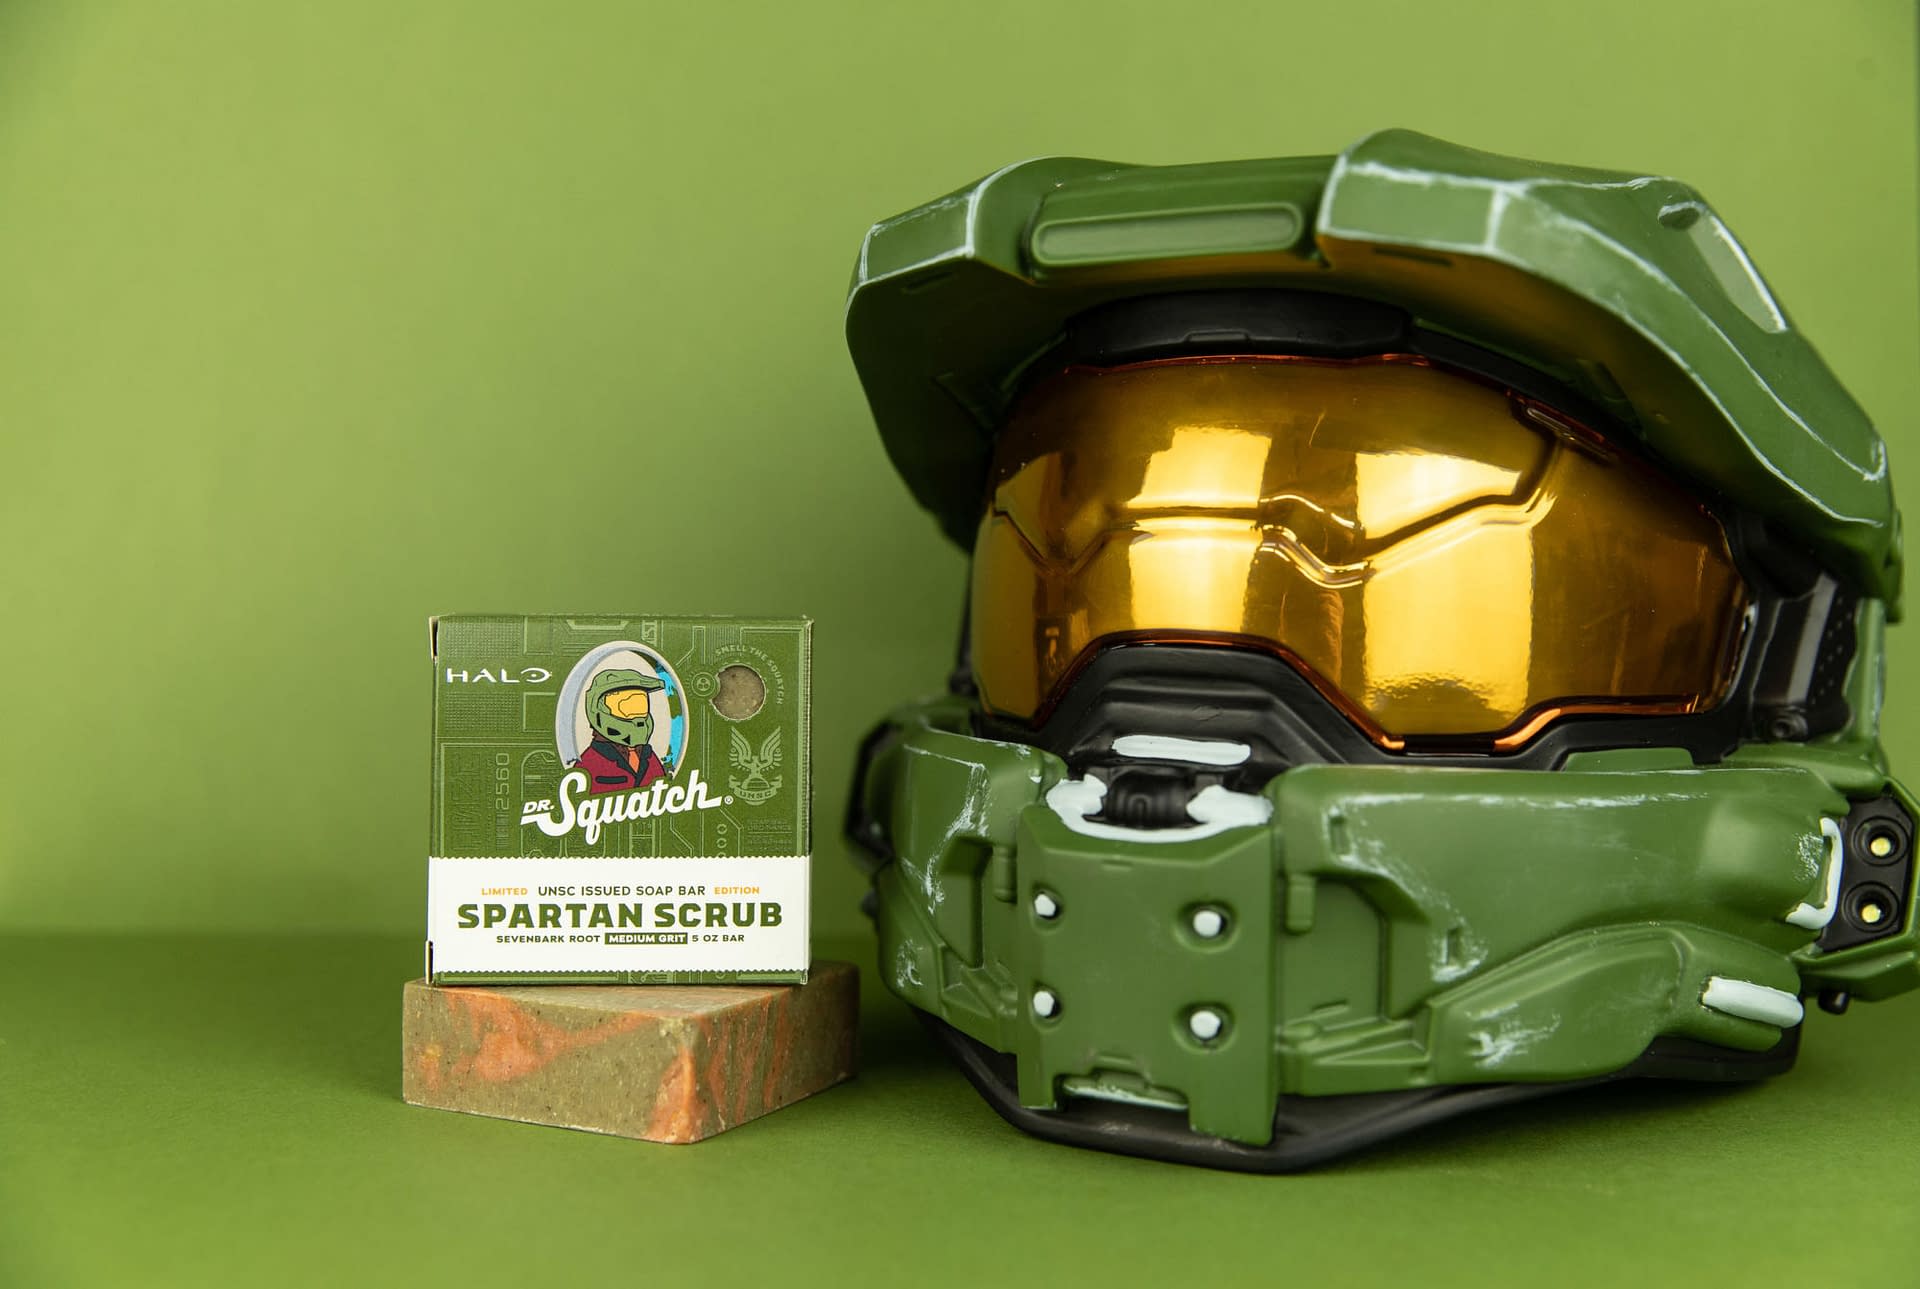 Dr. Squatch Releases New HaloBranded Spartan Scrub Soap